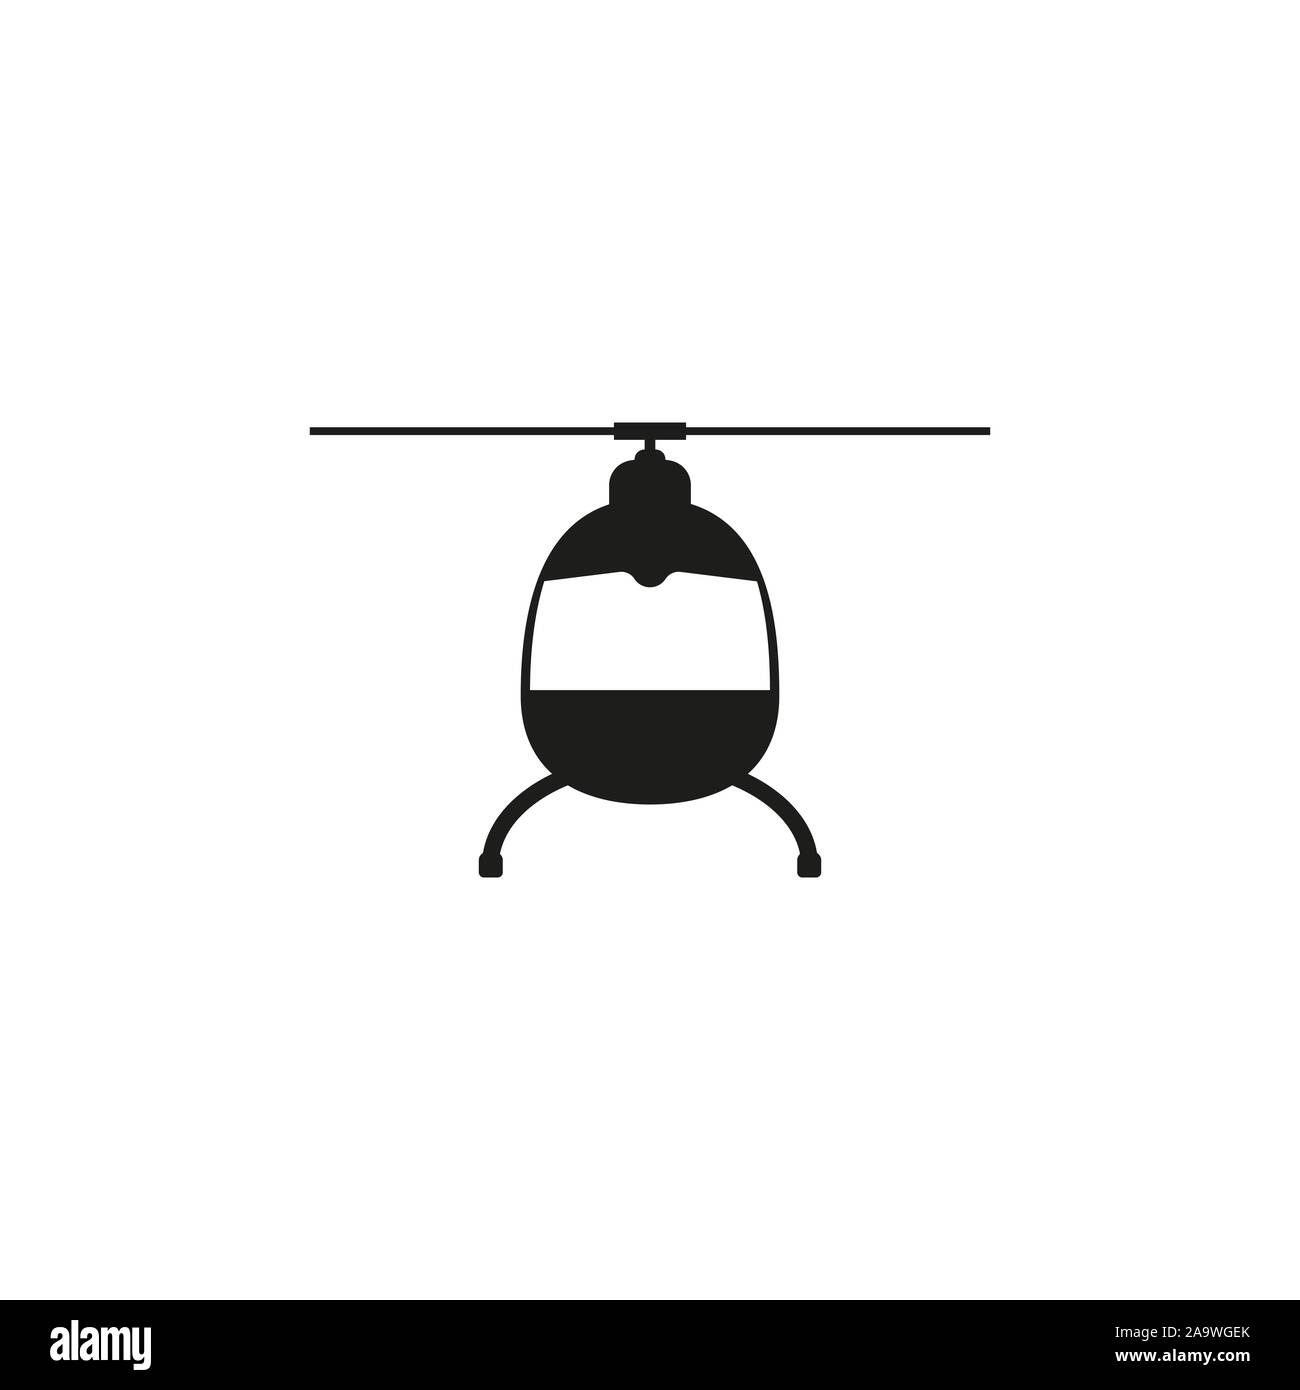 Helicopter, chopper icon. Vector illustration, flat design. Stock Vector